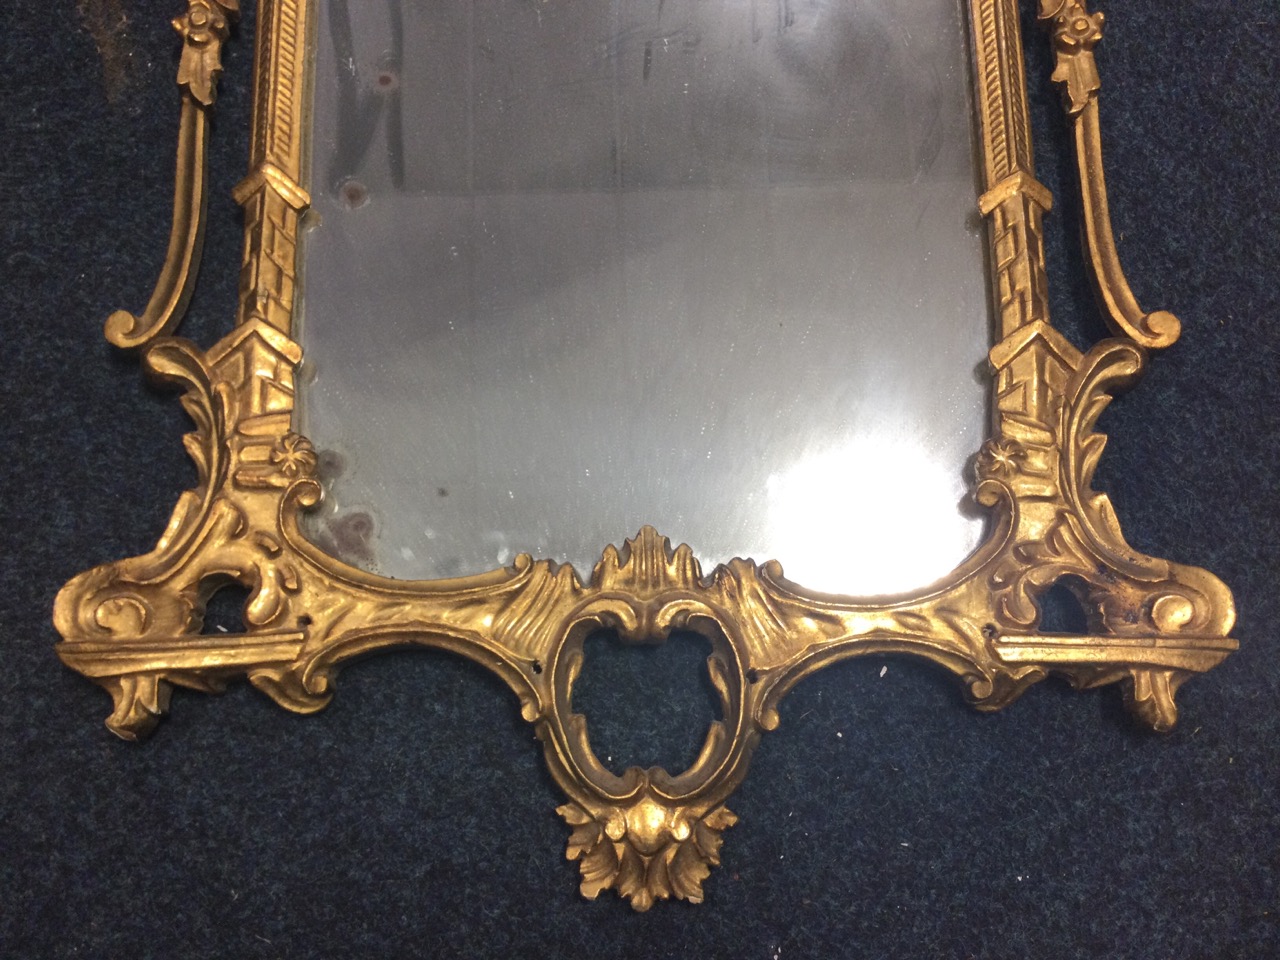 A Chippendale style rococo giltwood wall mirror, the acanthus and foliate scrolled crest above a - Image 2 of 3